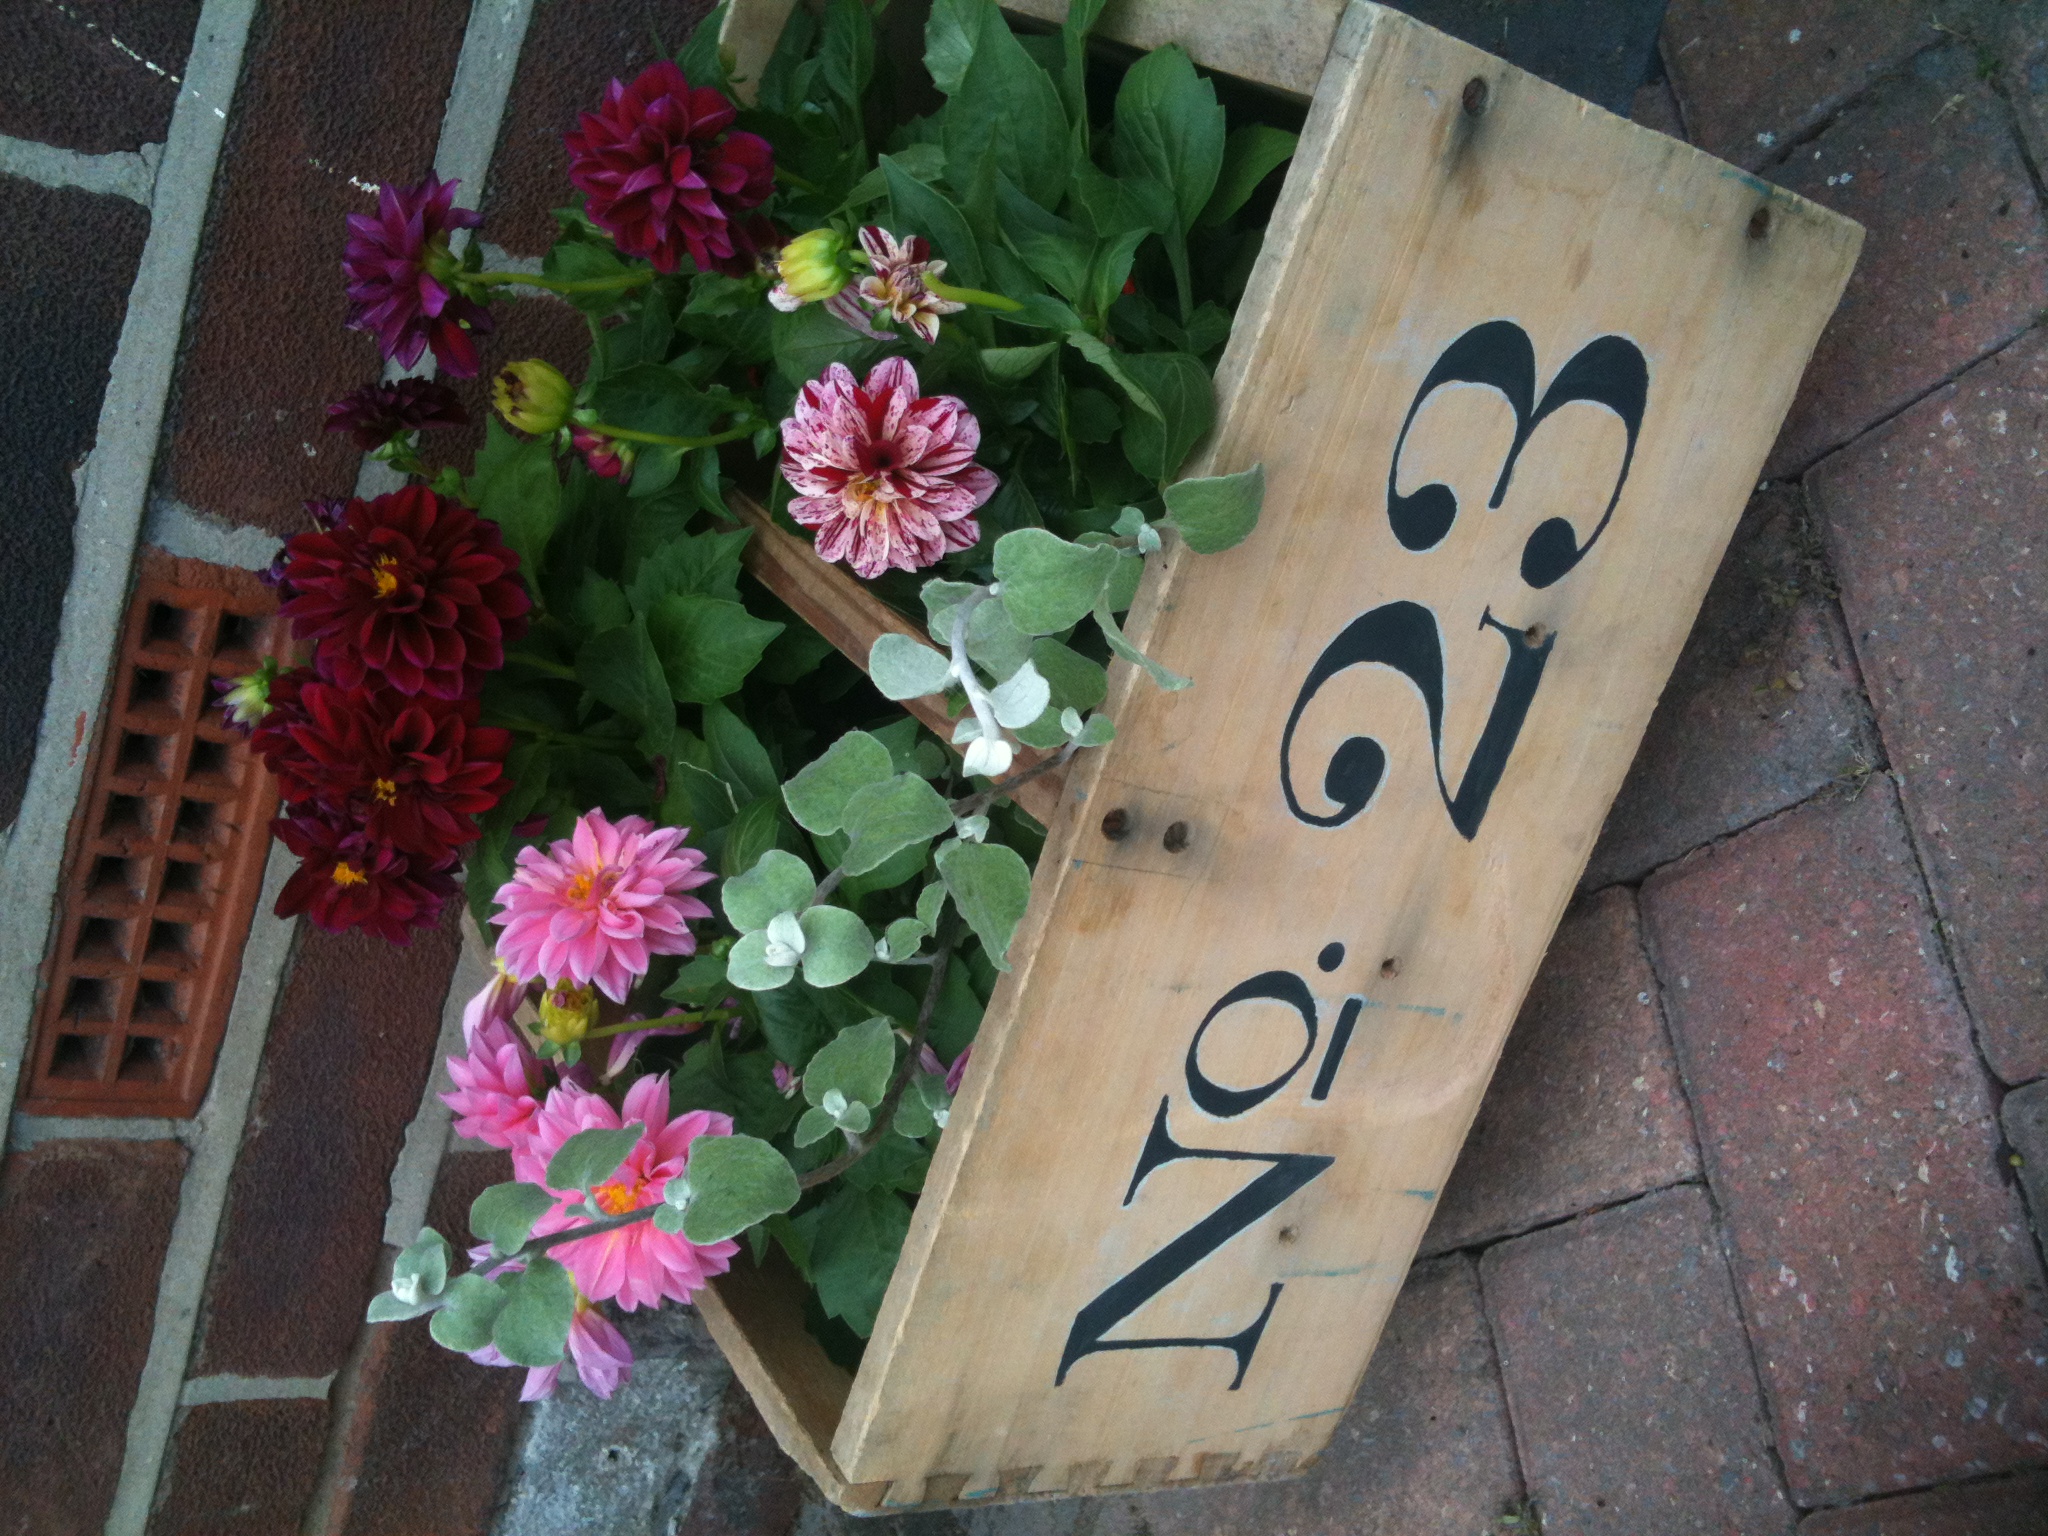 How to personalise an old wooden crate or trug